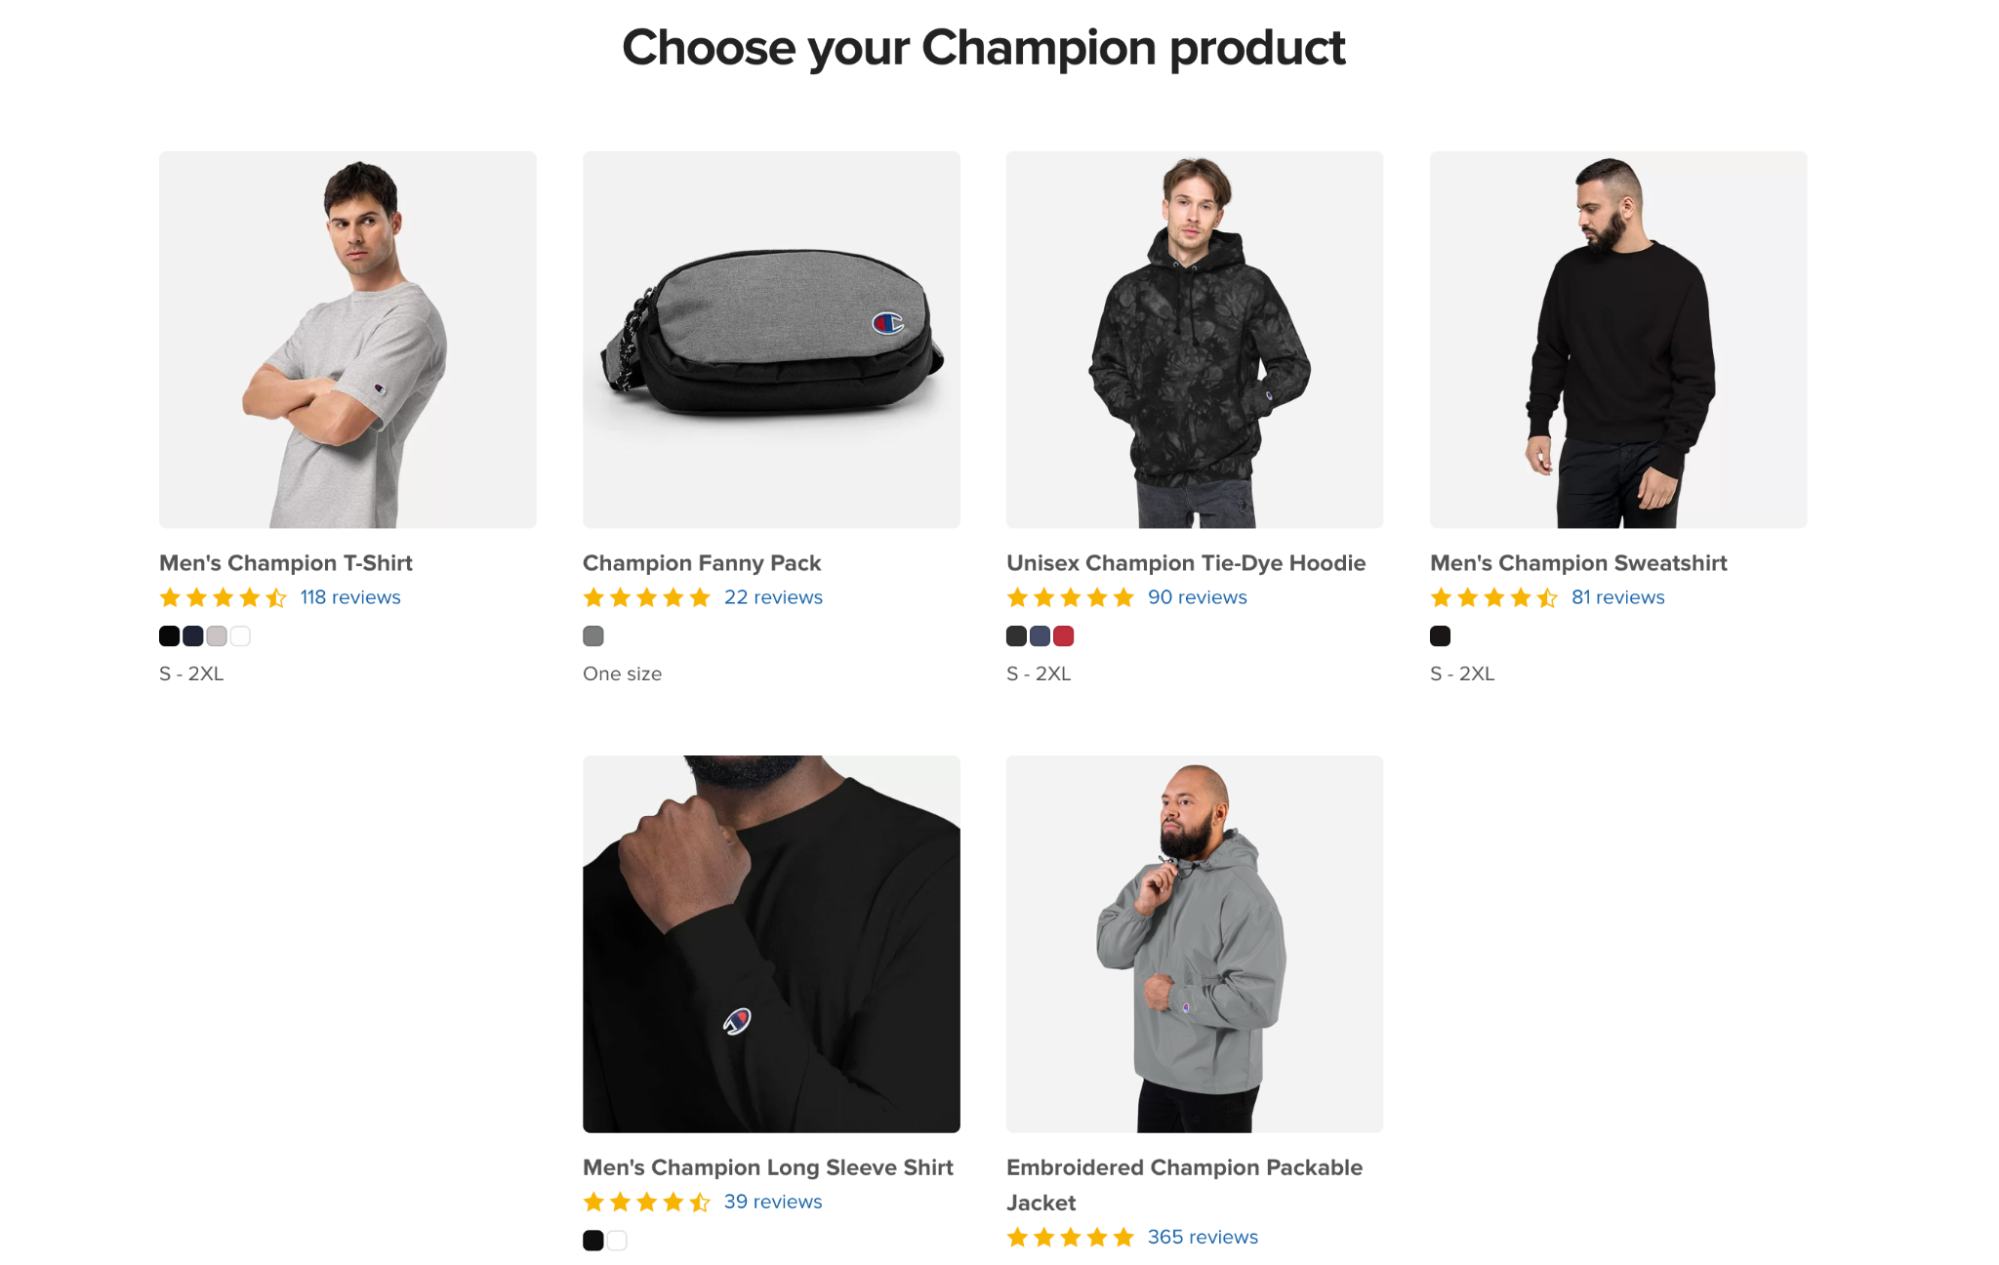 print-on-demand product page showing various items of Champion branded clothing.